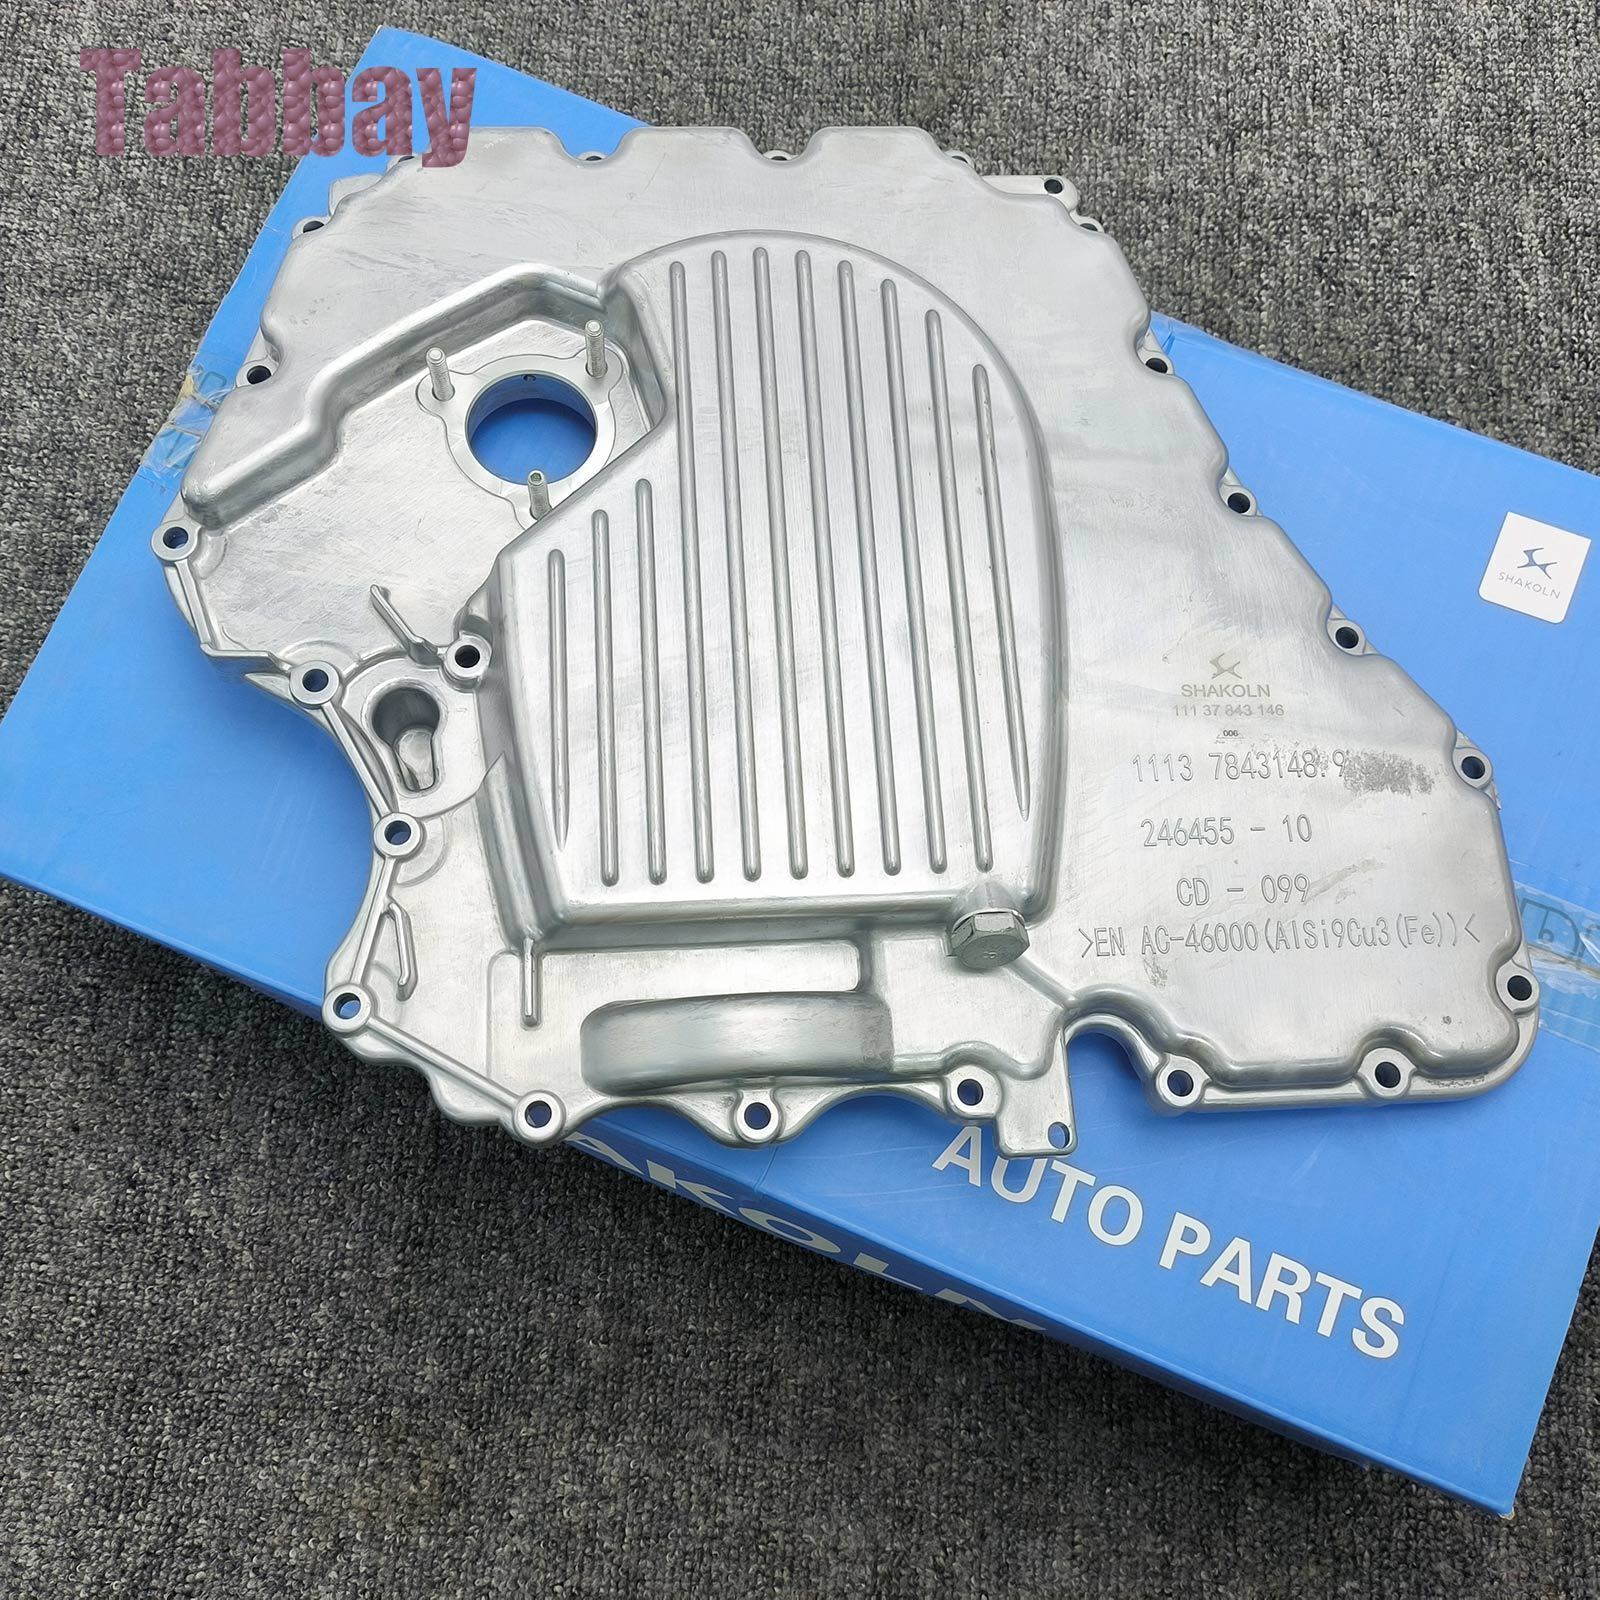 New Engine Lower Oil Pan for BMW M5 2010-2016 F10 M6 F06 F13 S63 11137843146